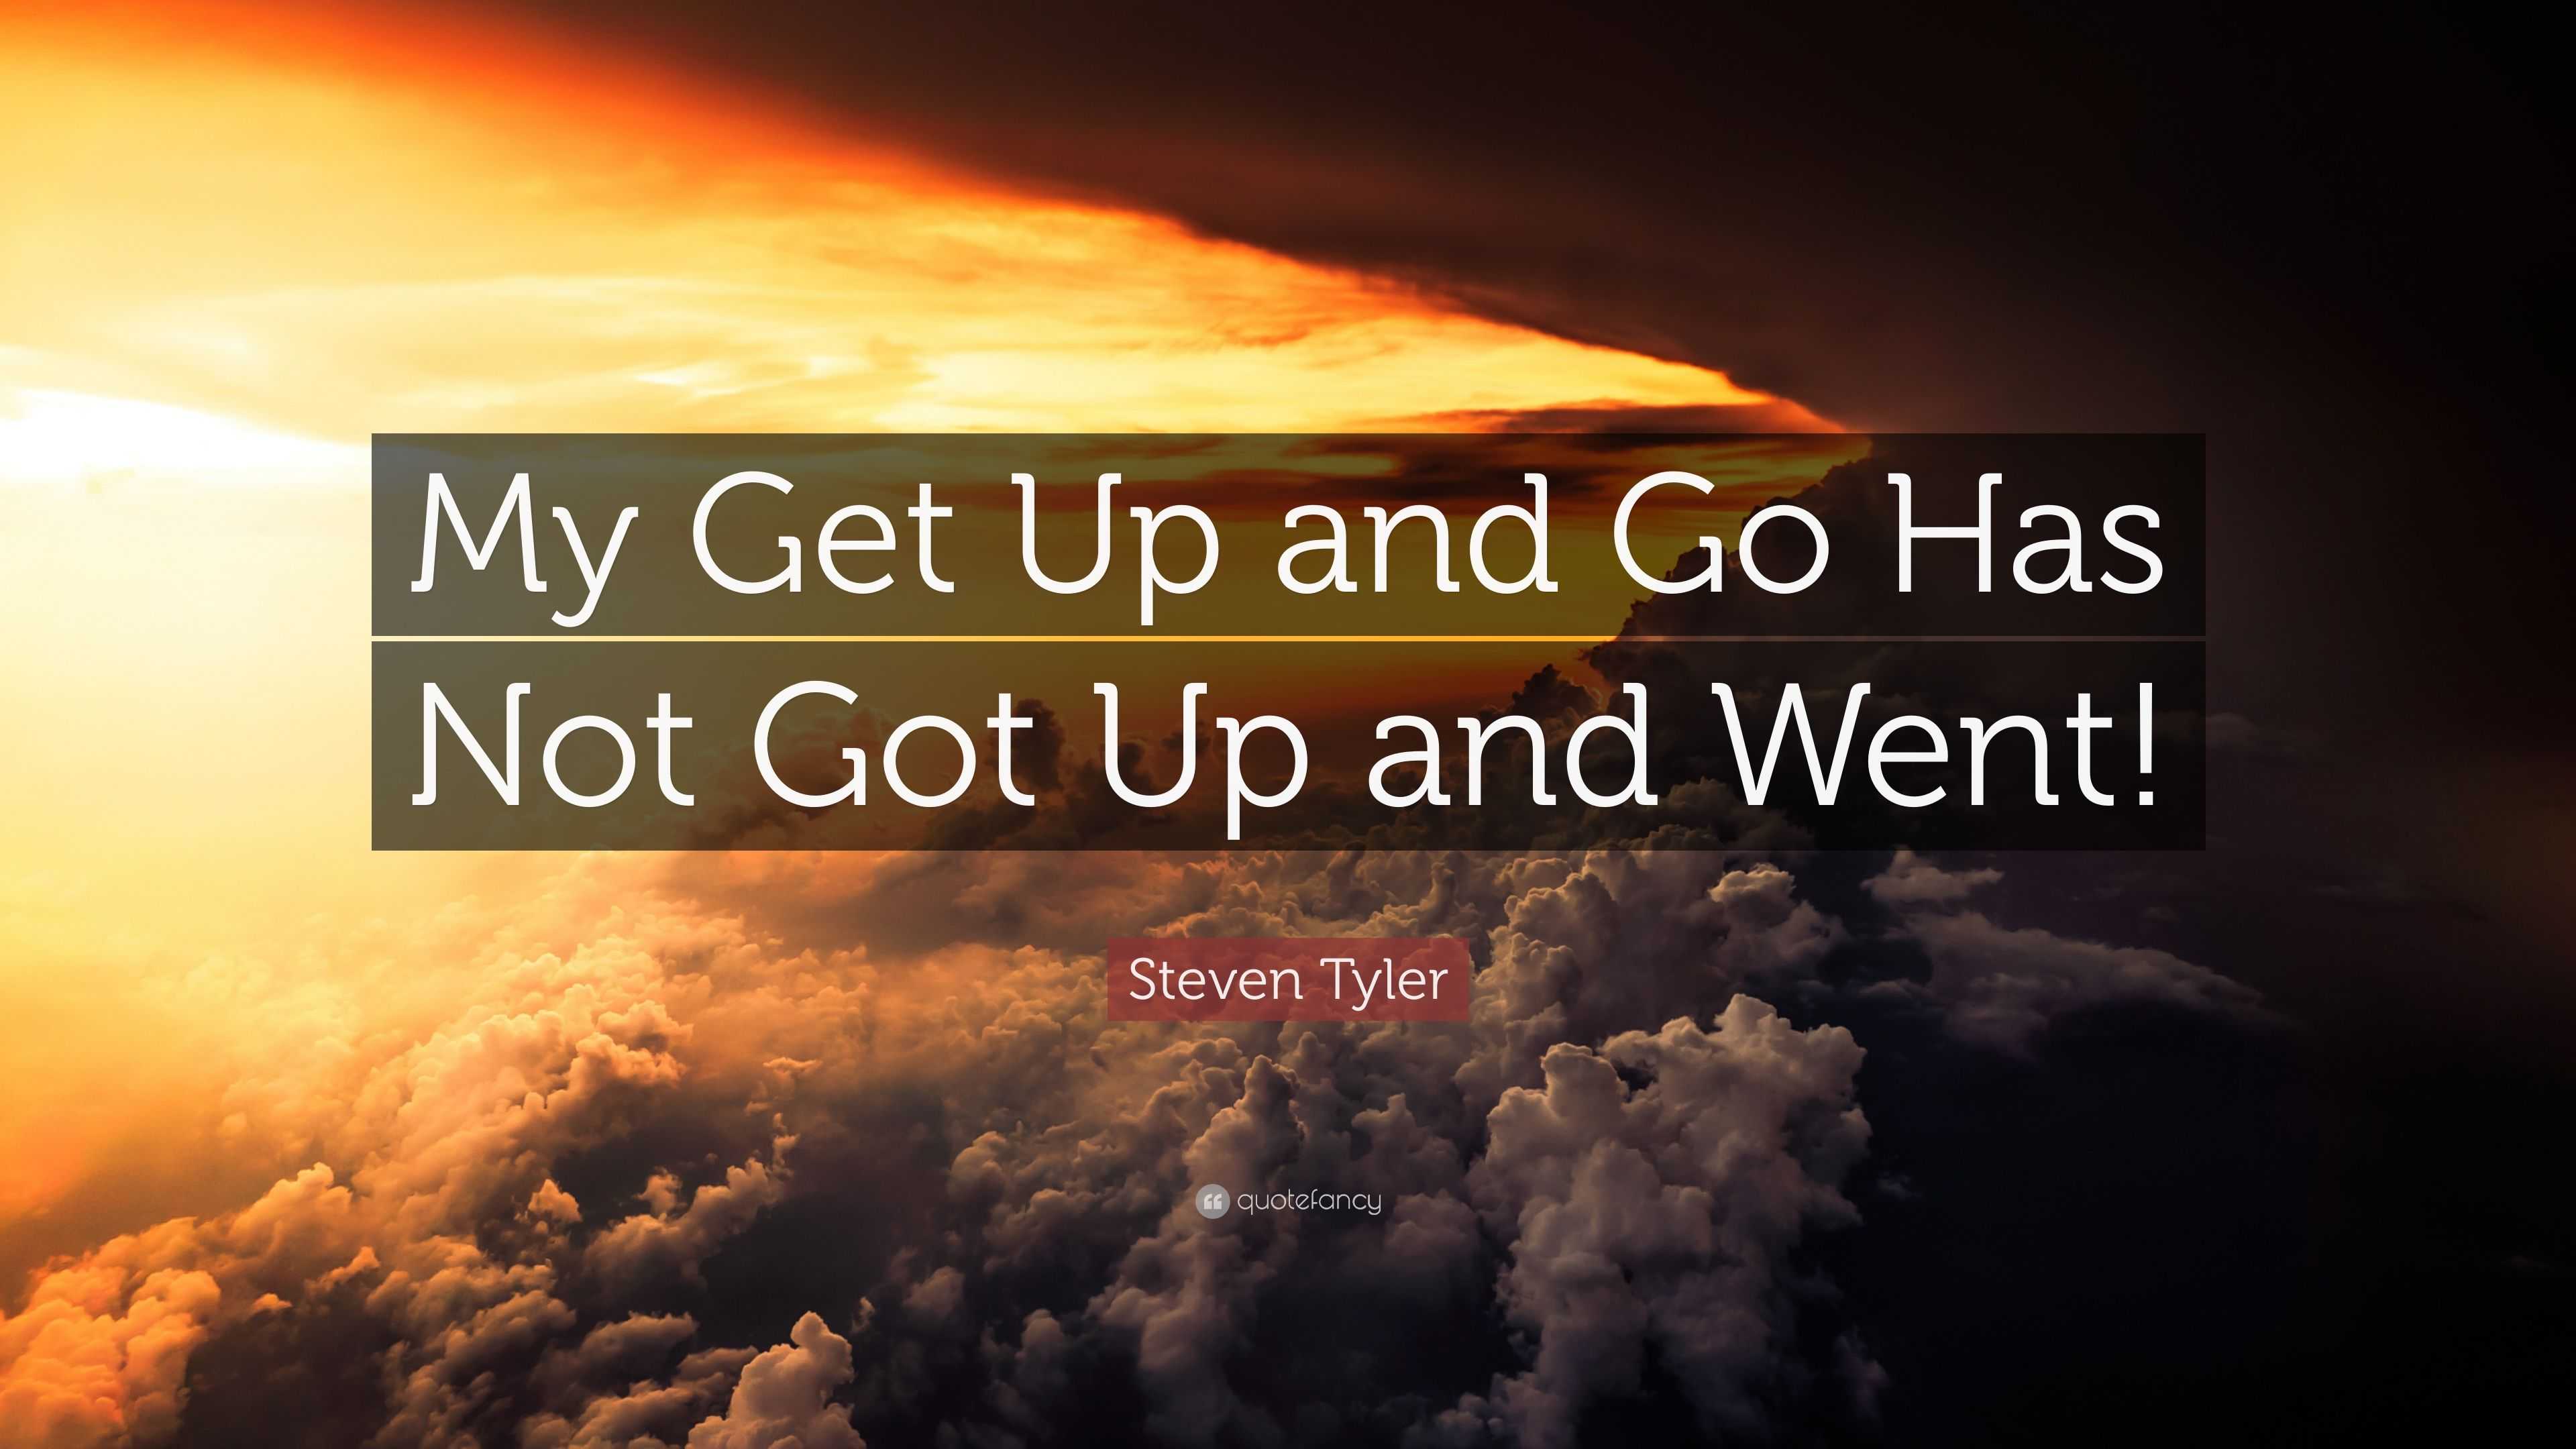 Steven Tyler Quote: “My Get Up and Go Has Not Got Up and Went!”